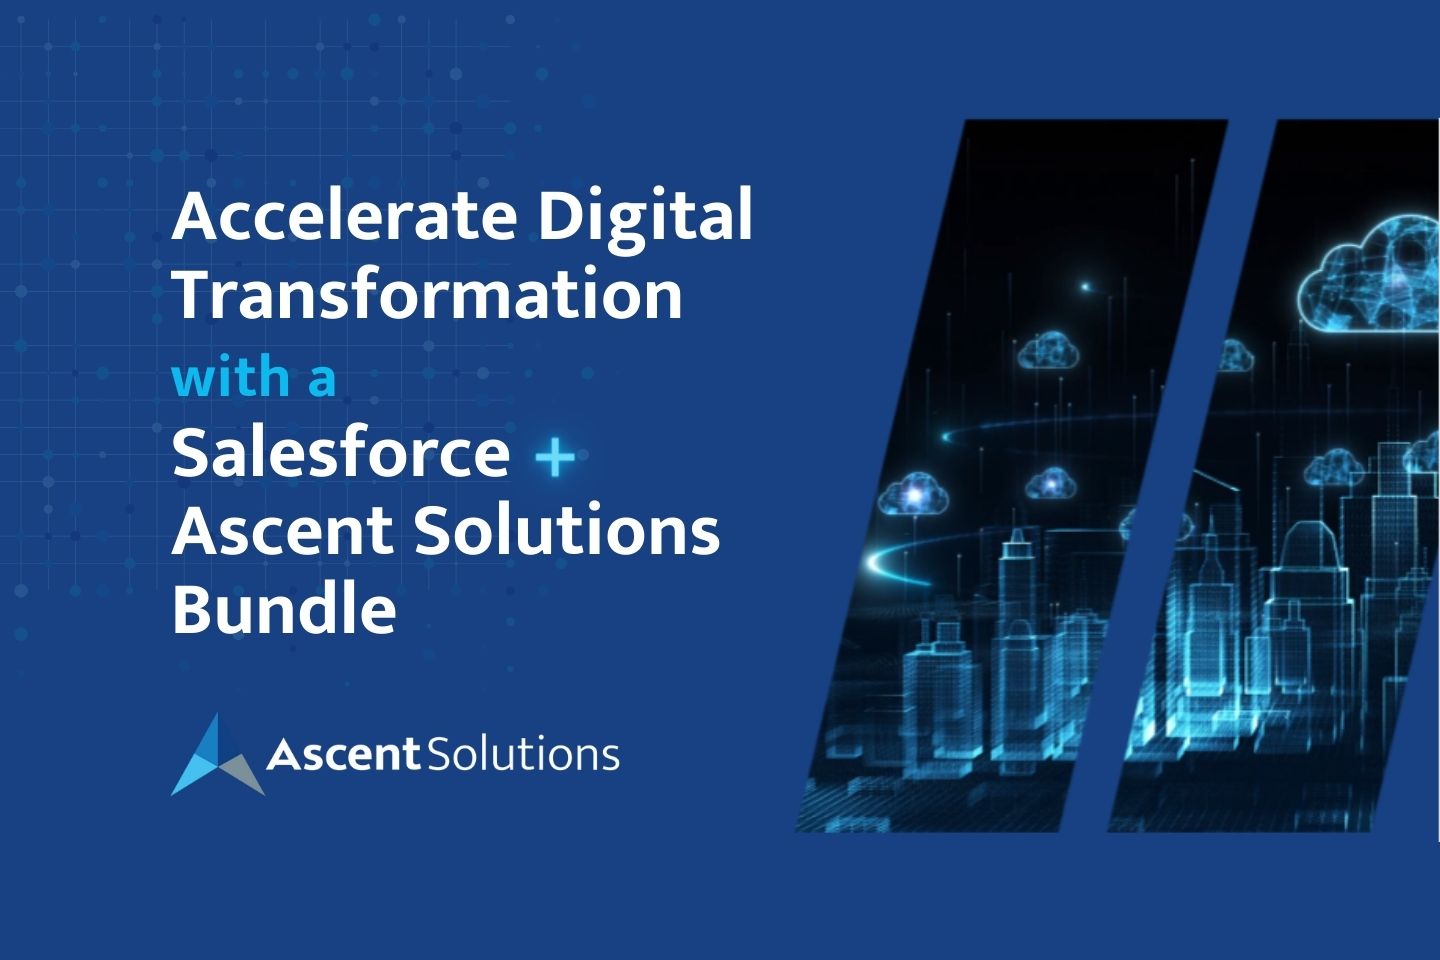 Accelerate Digital Transformation with a Salesforce and Ascent Solutions Bundle